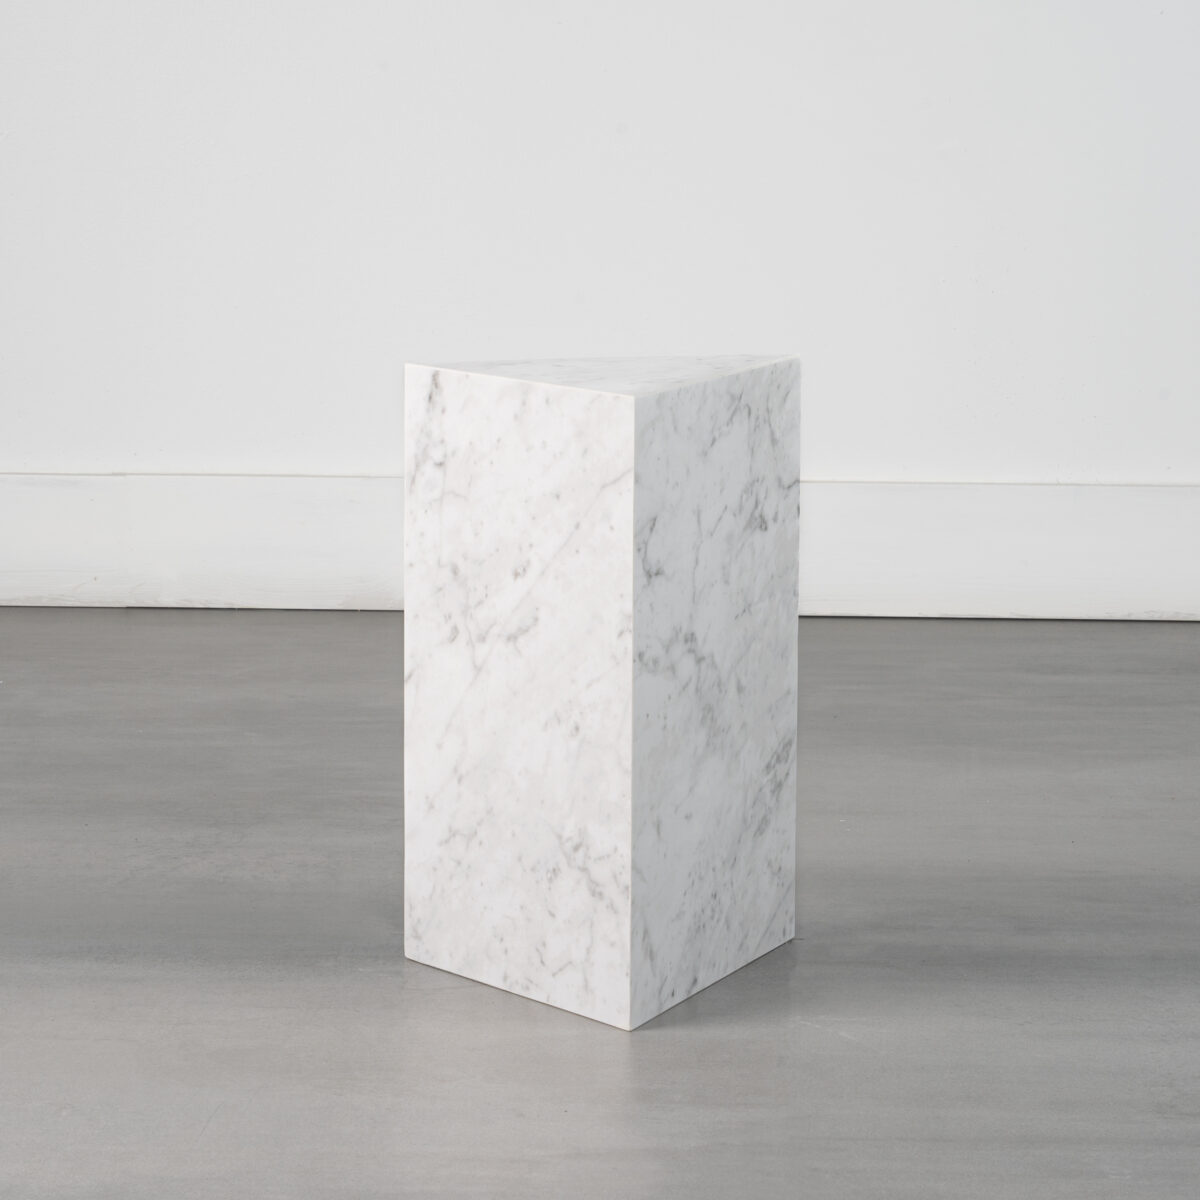 Triangle Side Table in Bianco Carrara Large-format Porcelain